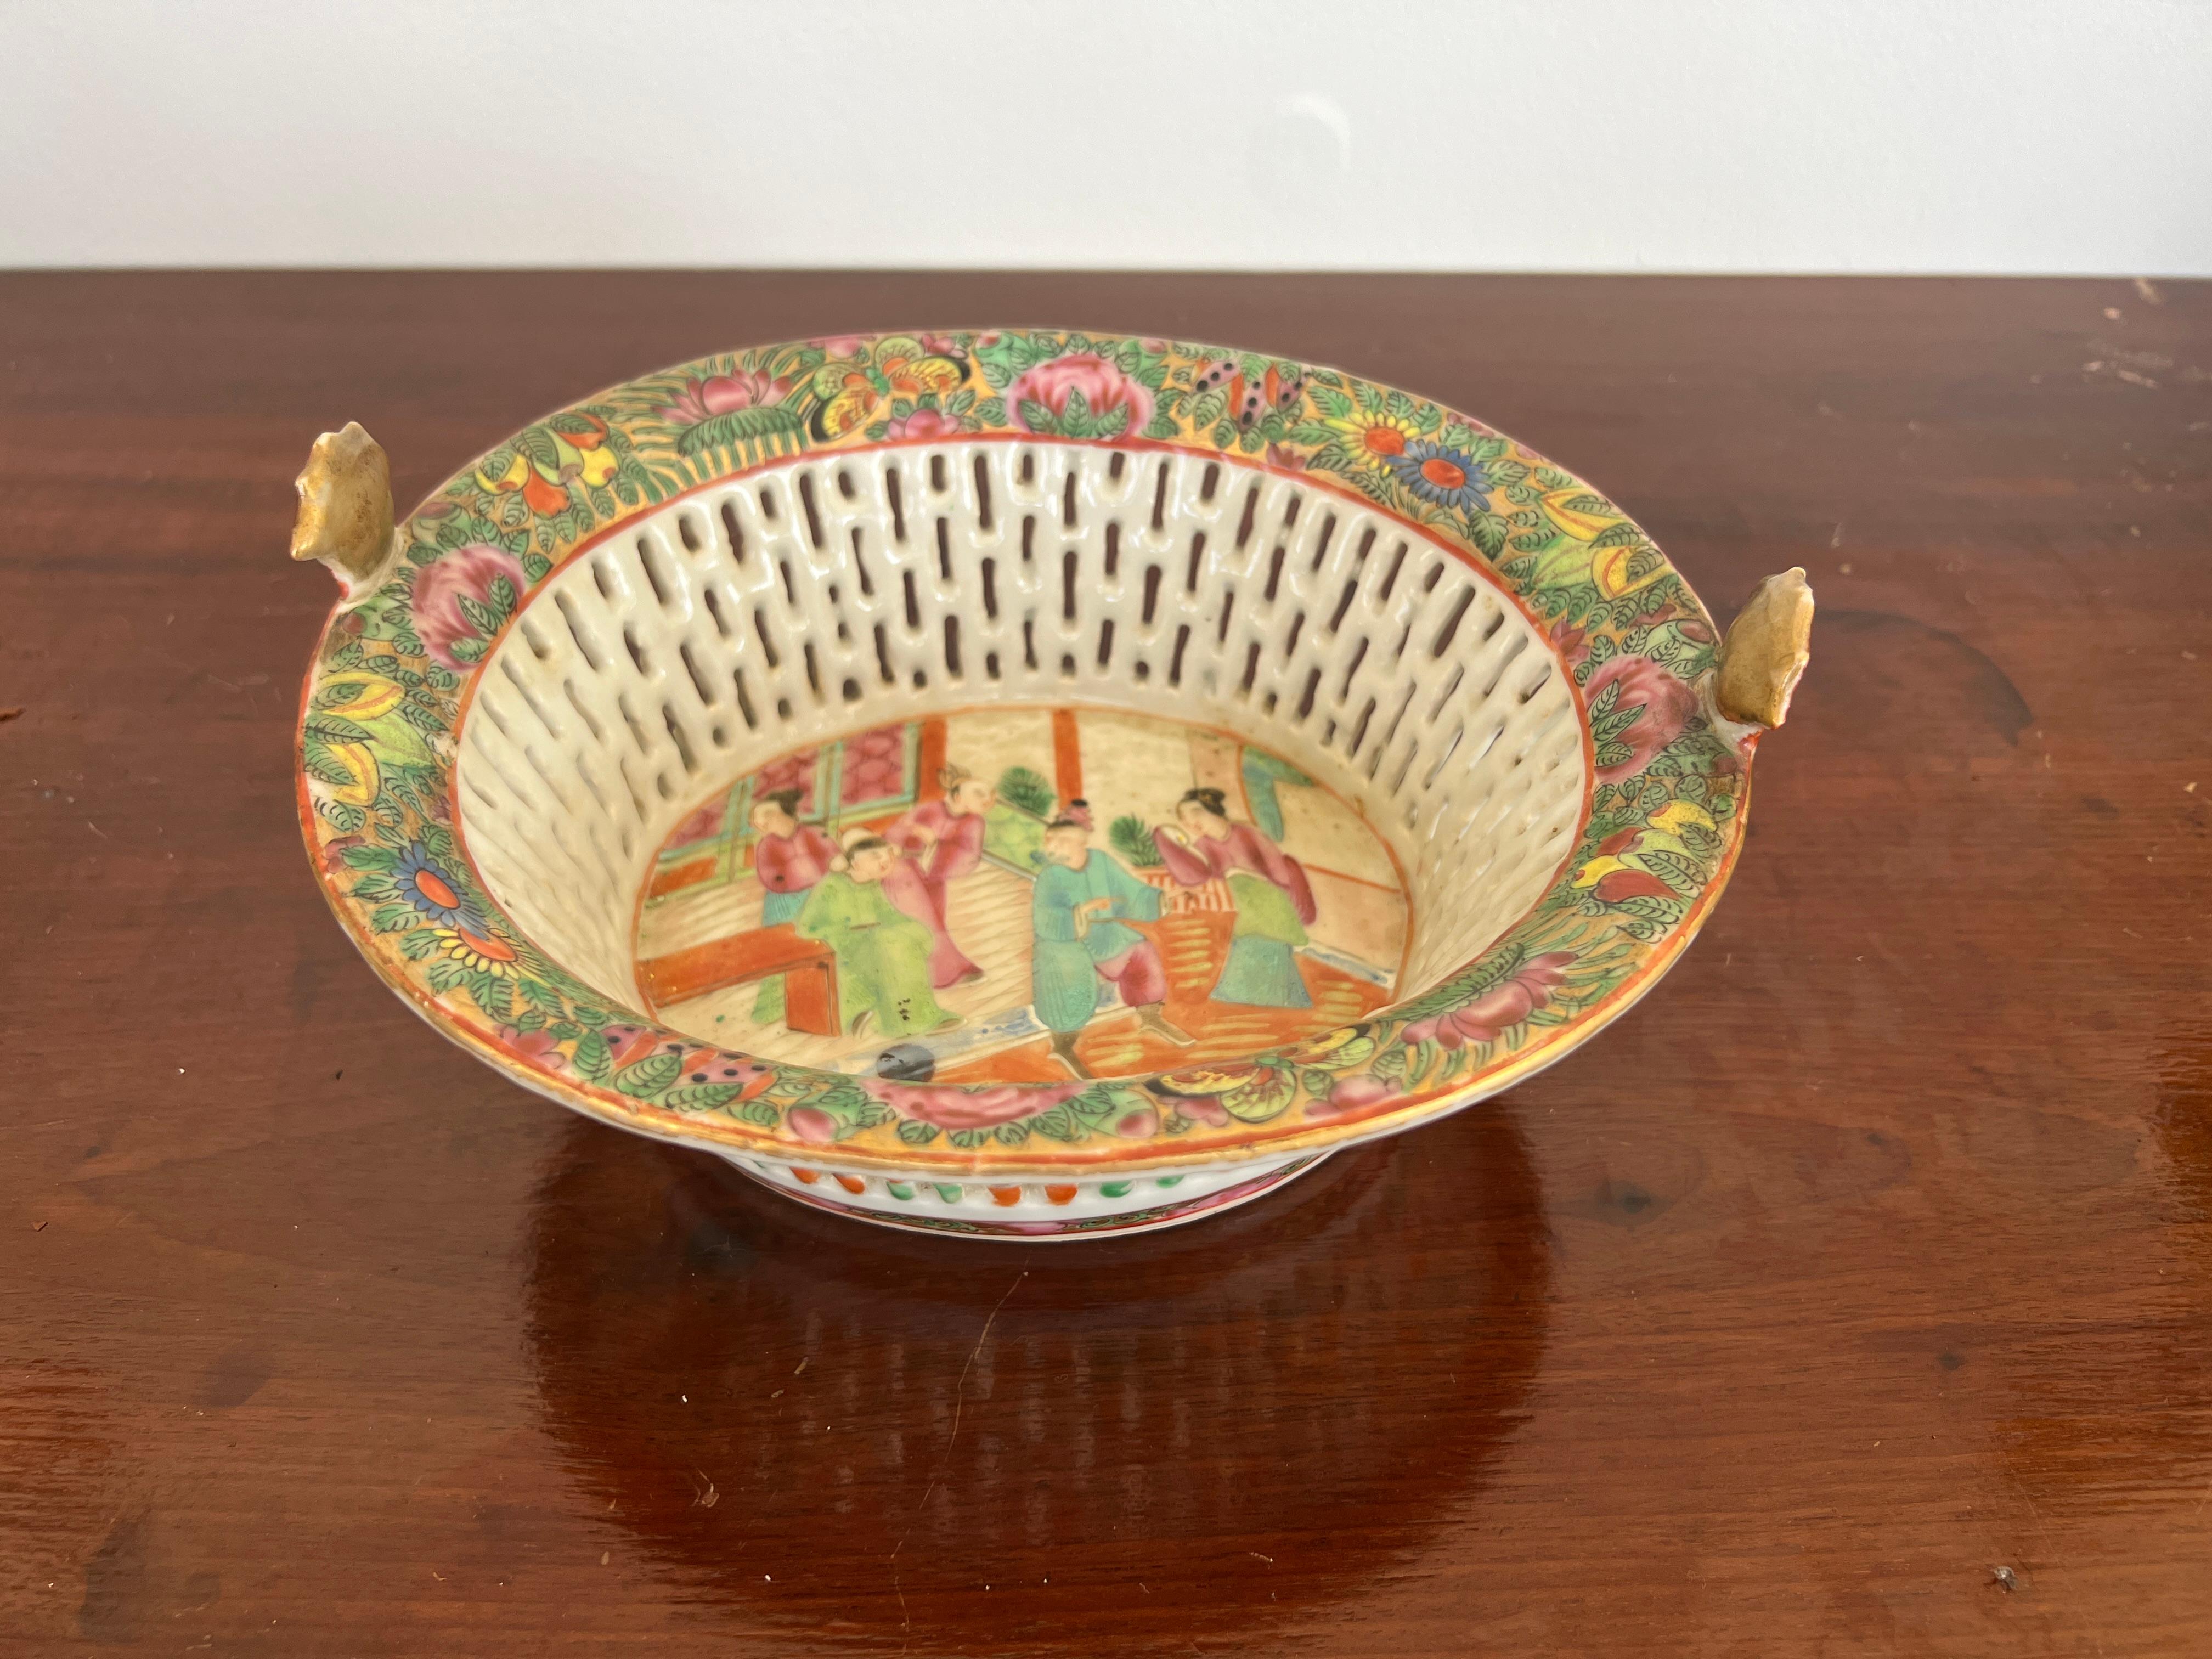 Chinese, 19th century.

An antique Chinese export porcelain chestnut basket. The basket features traditional famille rose medallion decoration with figural window to the central window. Butterfly motifs to the exterior edge forming into small red